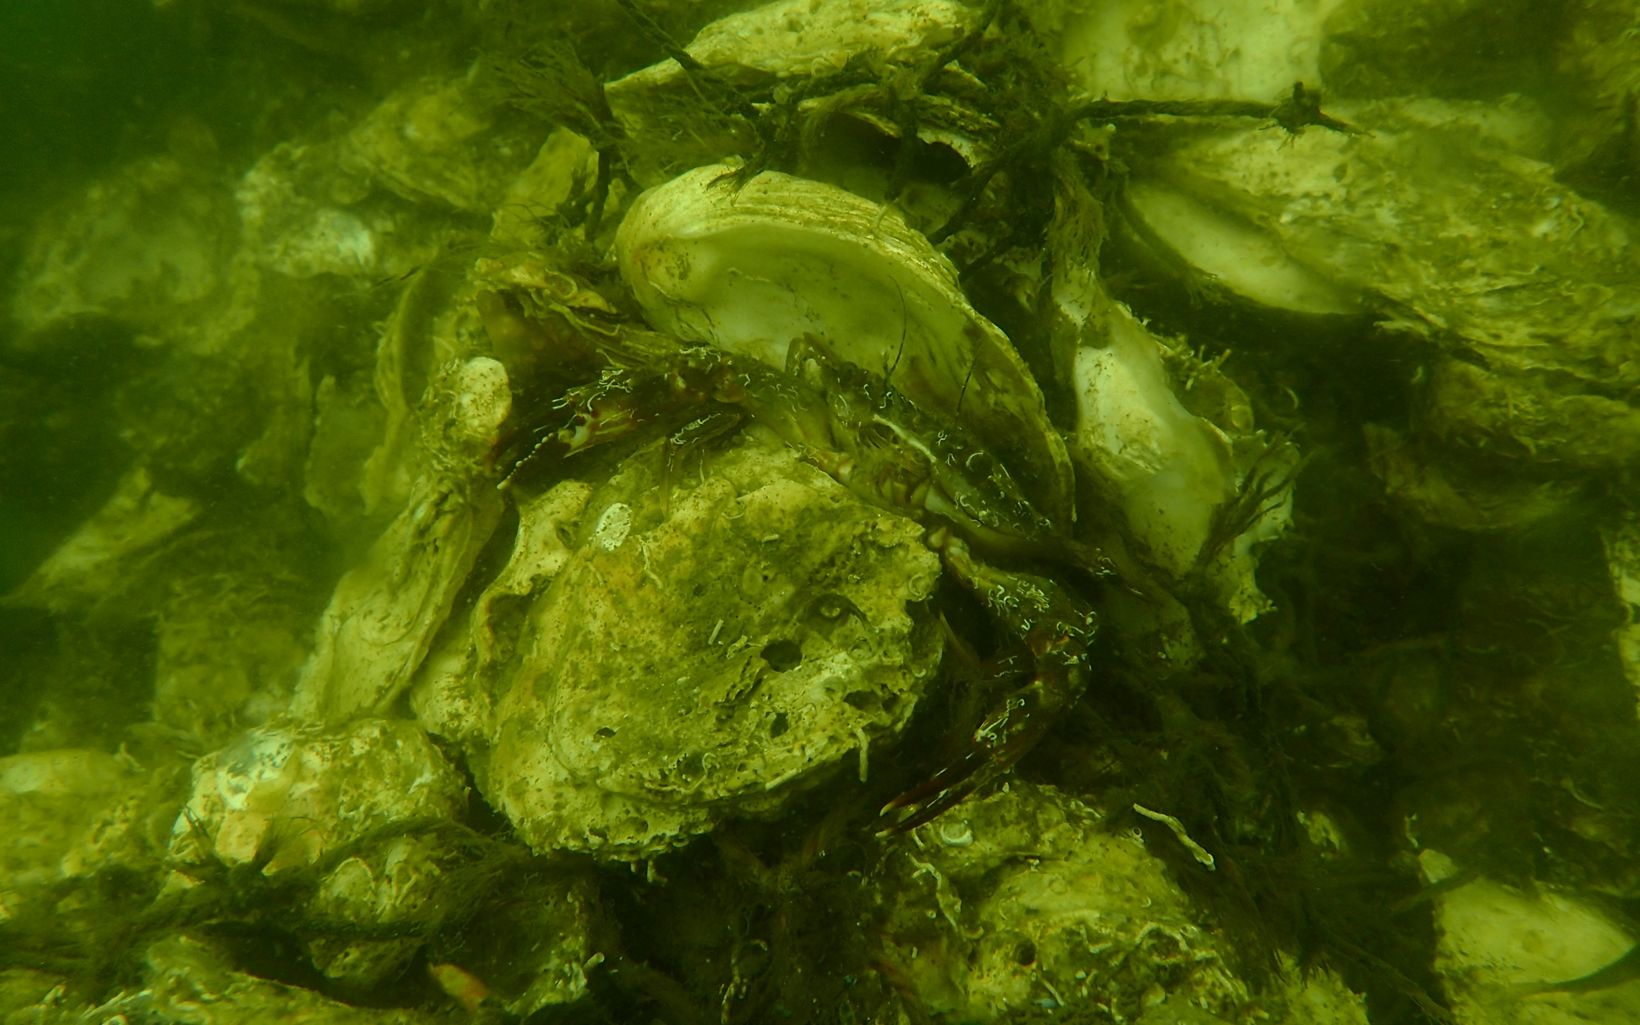 Underwater a small crab hides inside an oyster shell that is part of a new oyster reef.